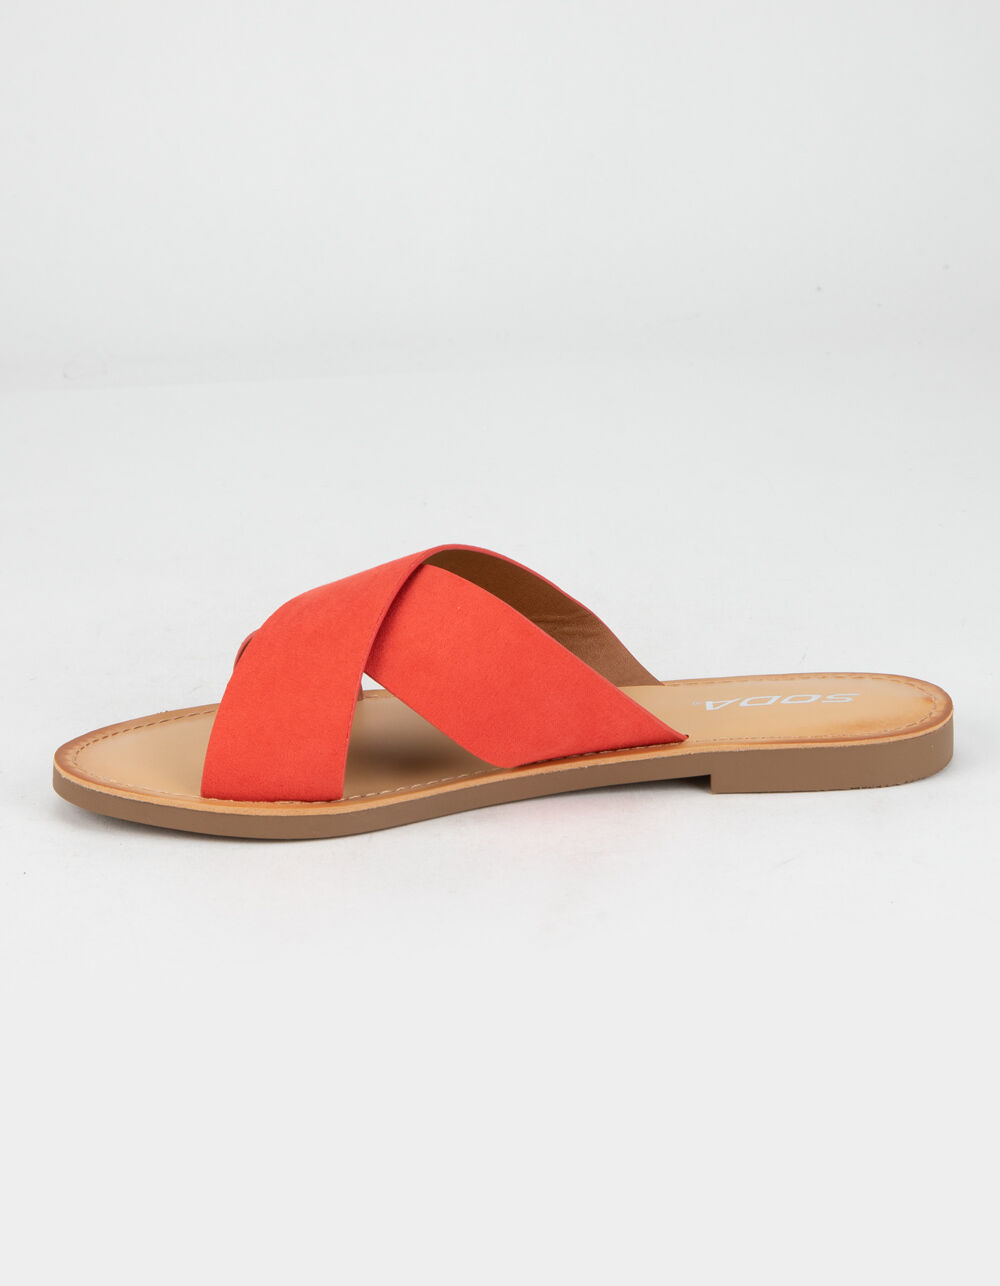 SODA Criss Cross Womens Coral Slide Sandals - CORAL | Tillys